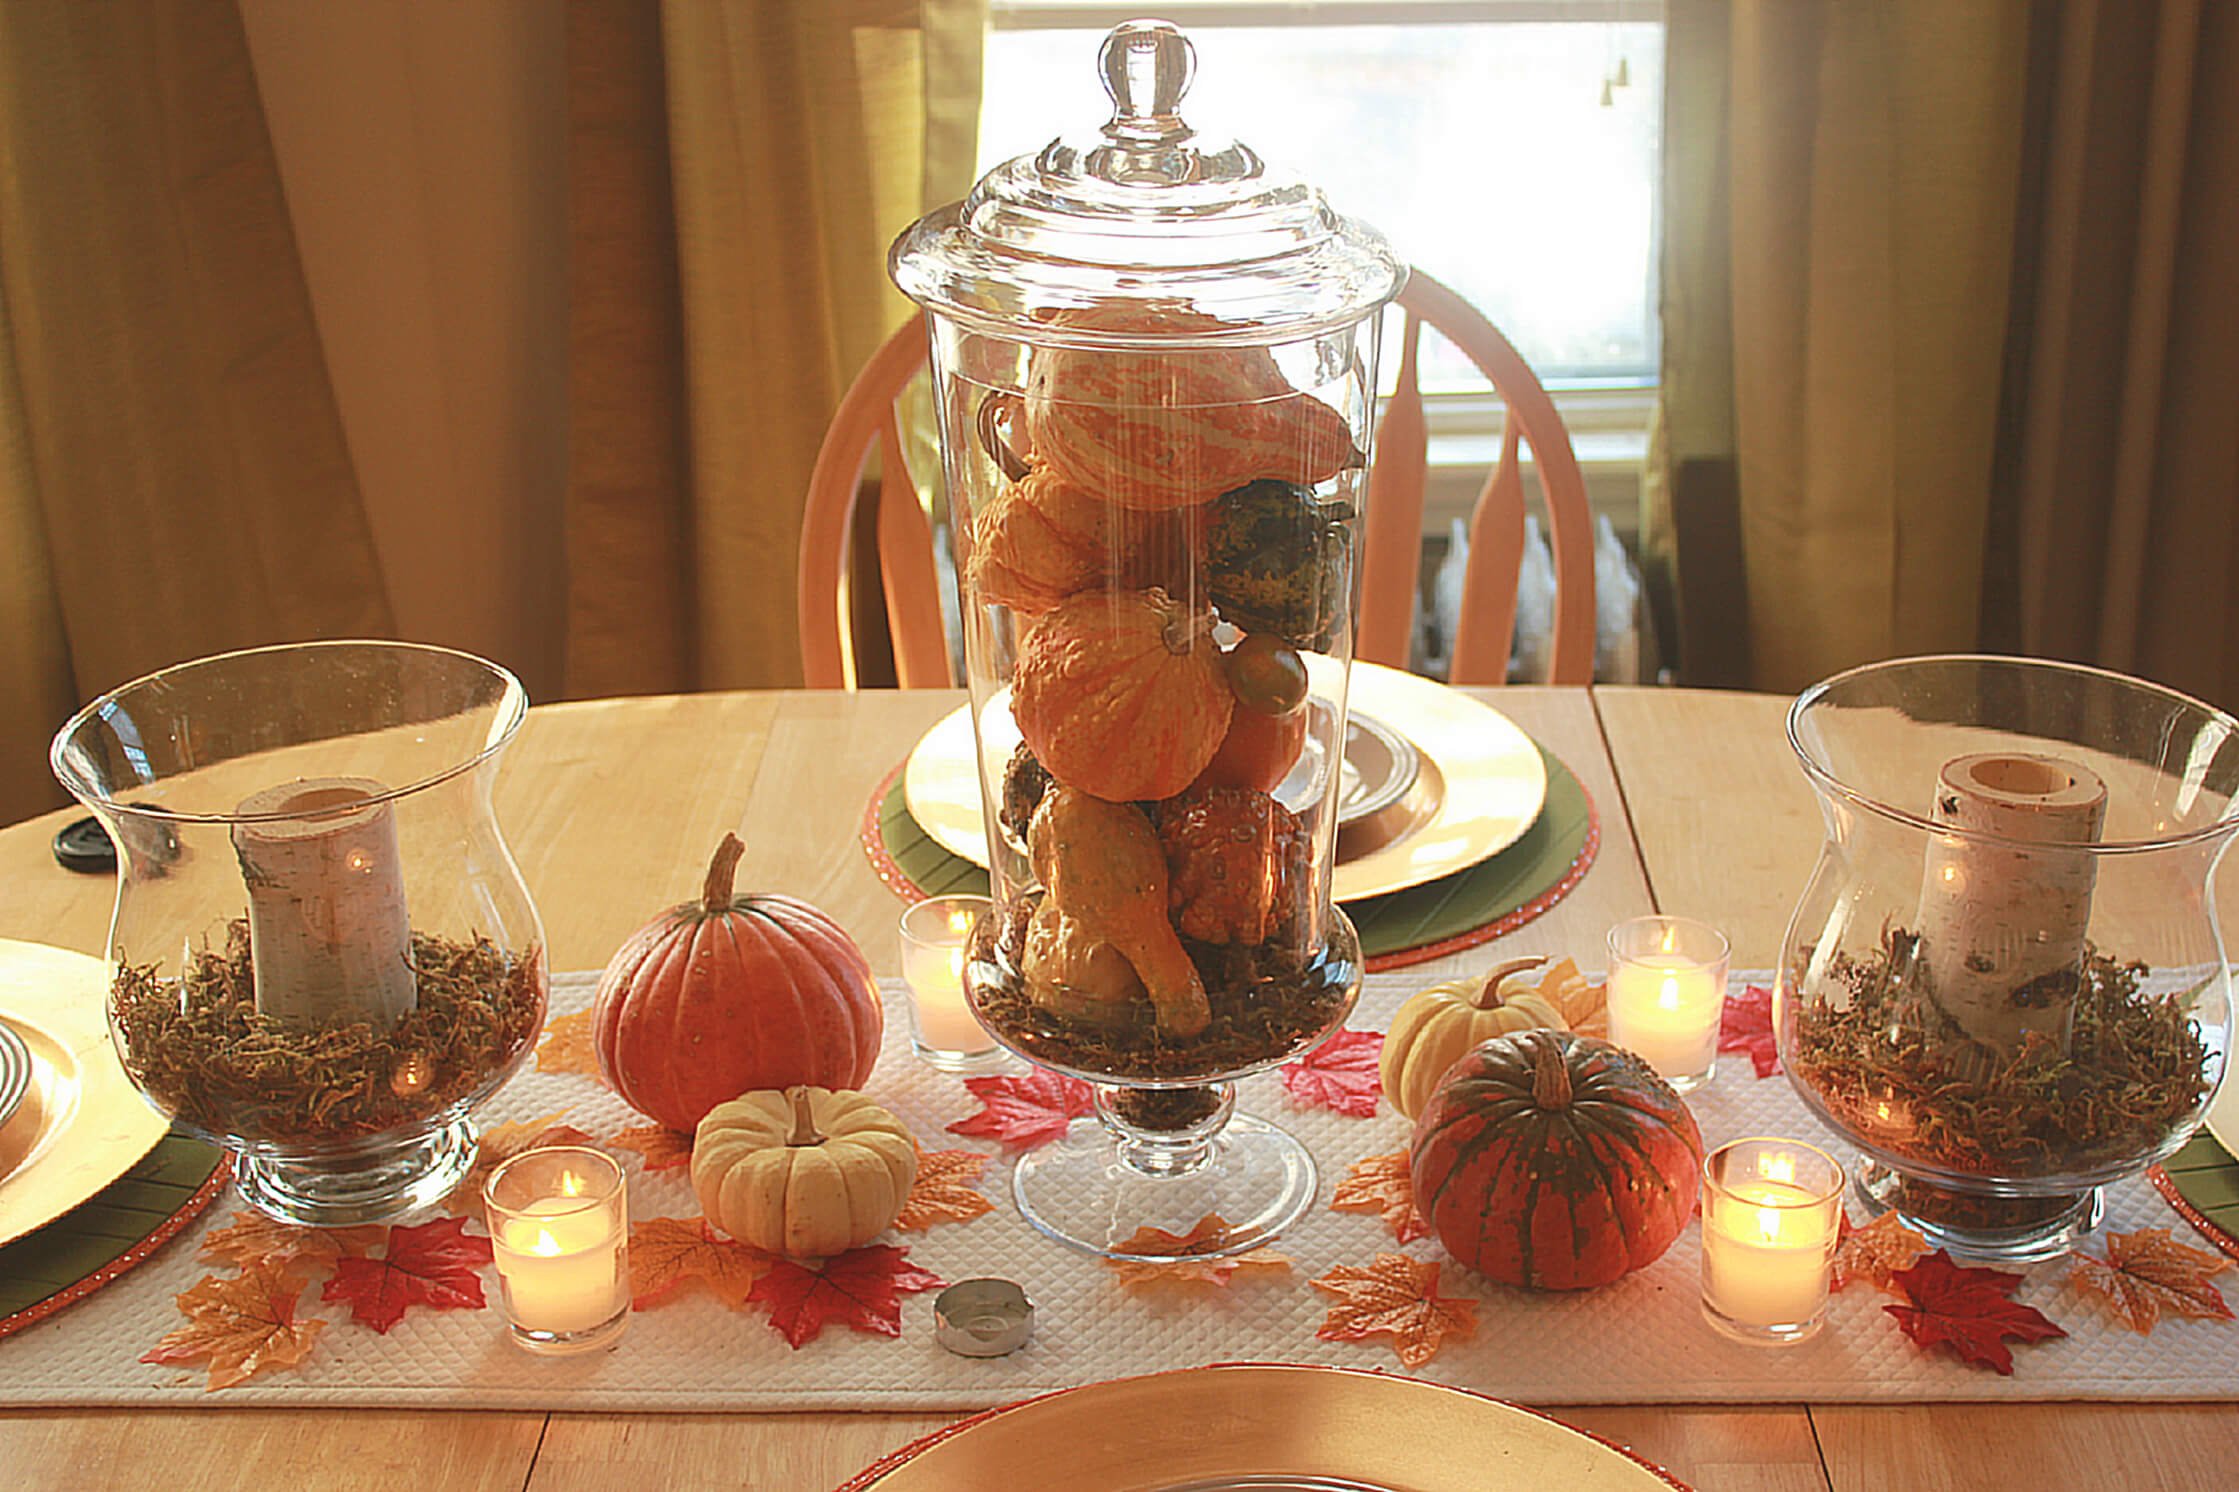 12-rustic-chic-thanksgiving-decorations-ideas